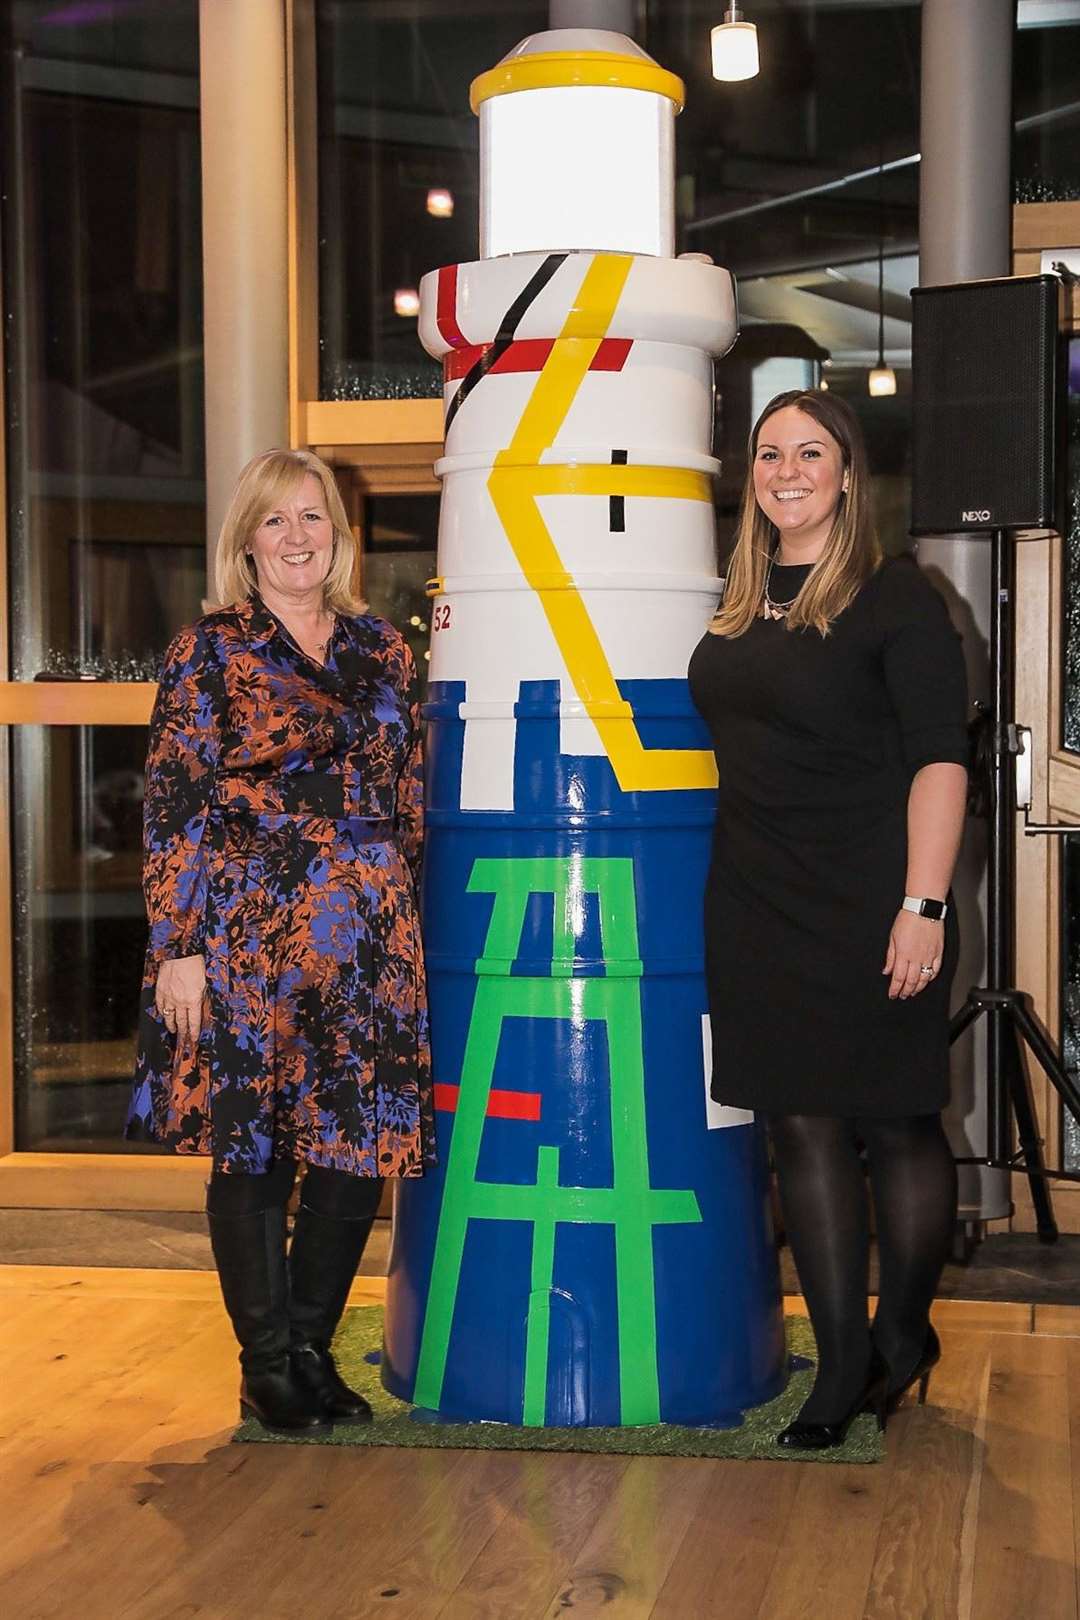 CLAN's Dr Colette Backwell and Fiona Fernie took part in a reception at Holyrood with Visit Scotland who are now calling on artists for submissions to design a themed lighthouse.